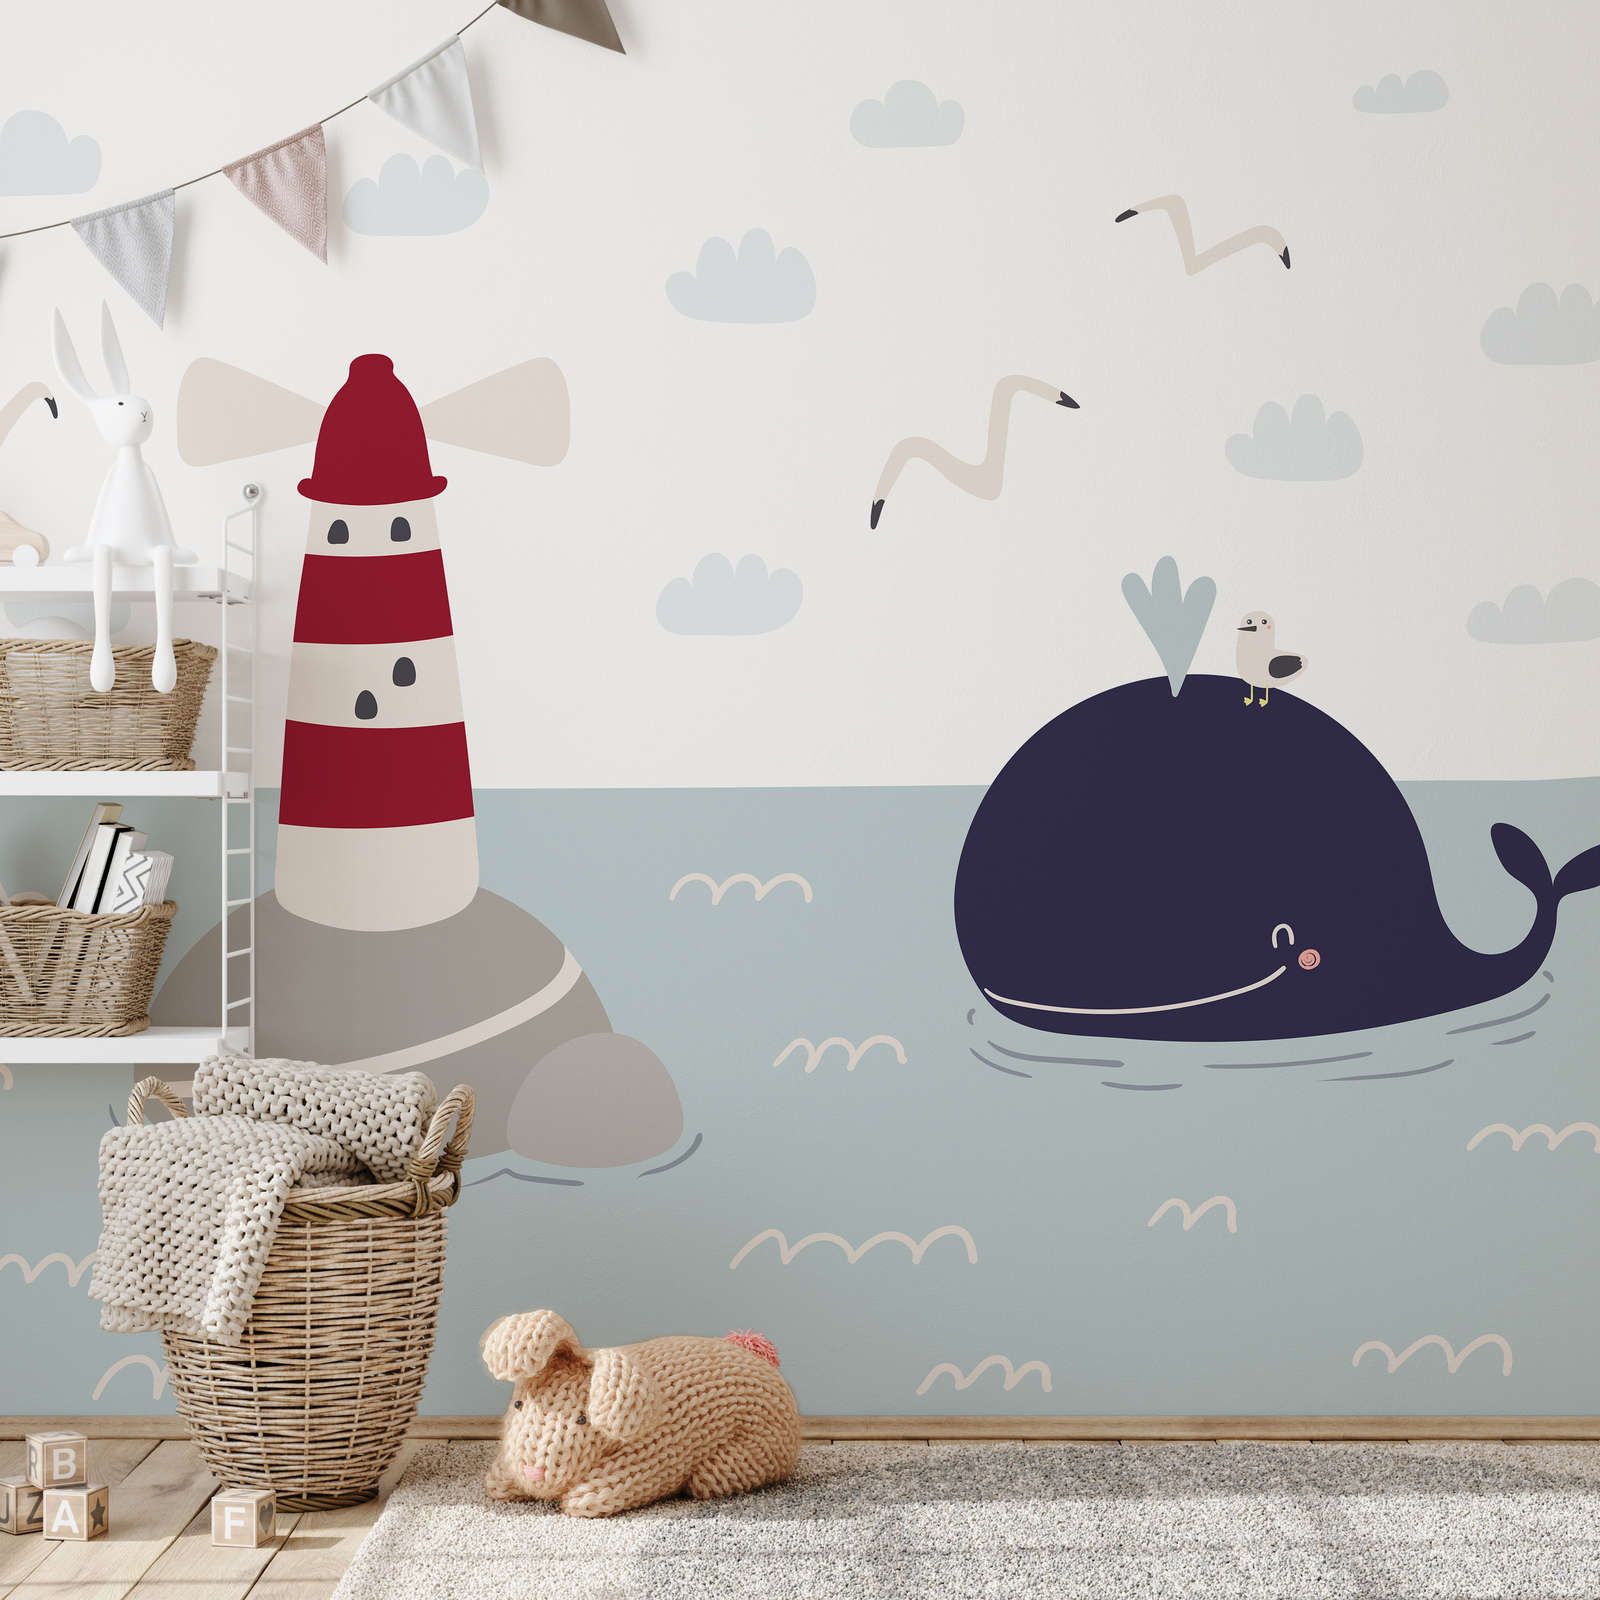             Children's Room Wallpaper with Lighthouse and Whale - Textured non-woven
        